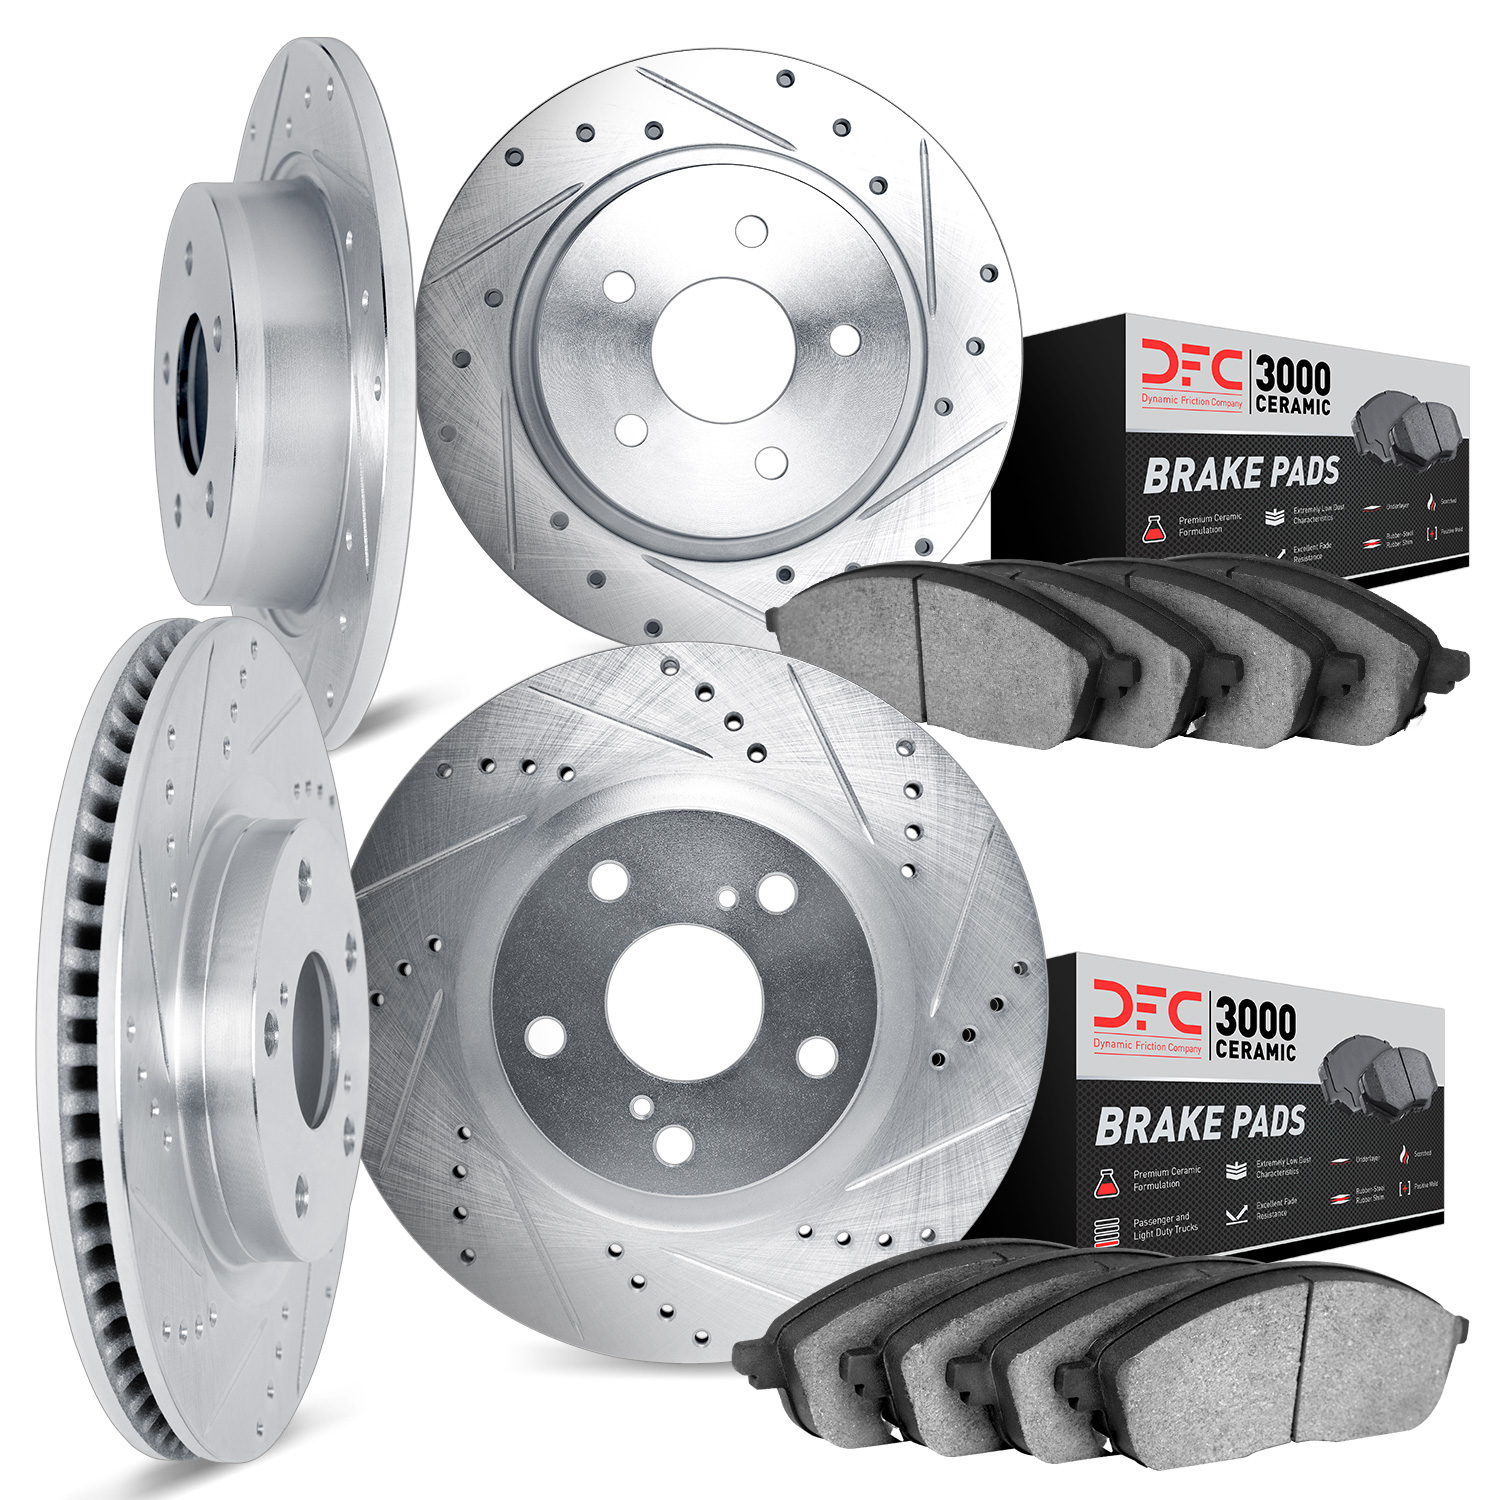 7304-56008 Drilled/Slotted Brake Rotor with 3000-Series Ceramic Brake Pads Kit [Silver], 1991-1994 Ford/Lincoln/Mercury/Mazda, P